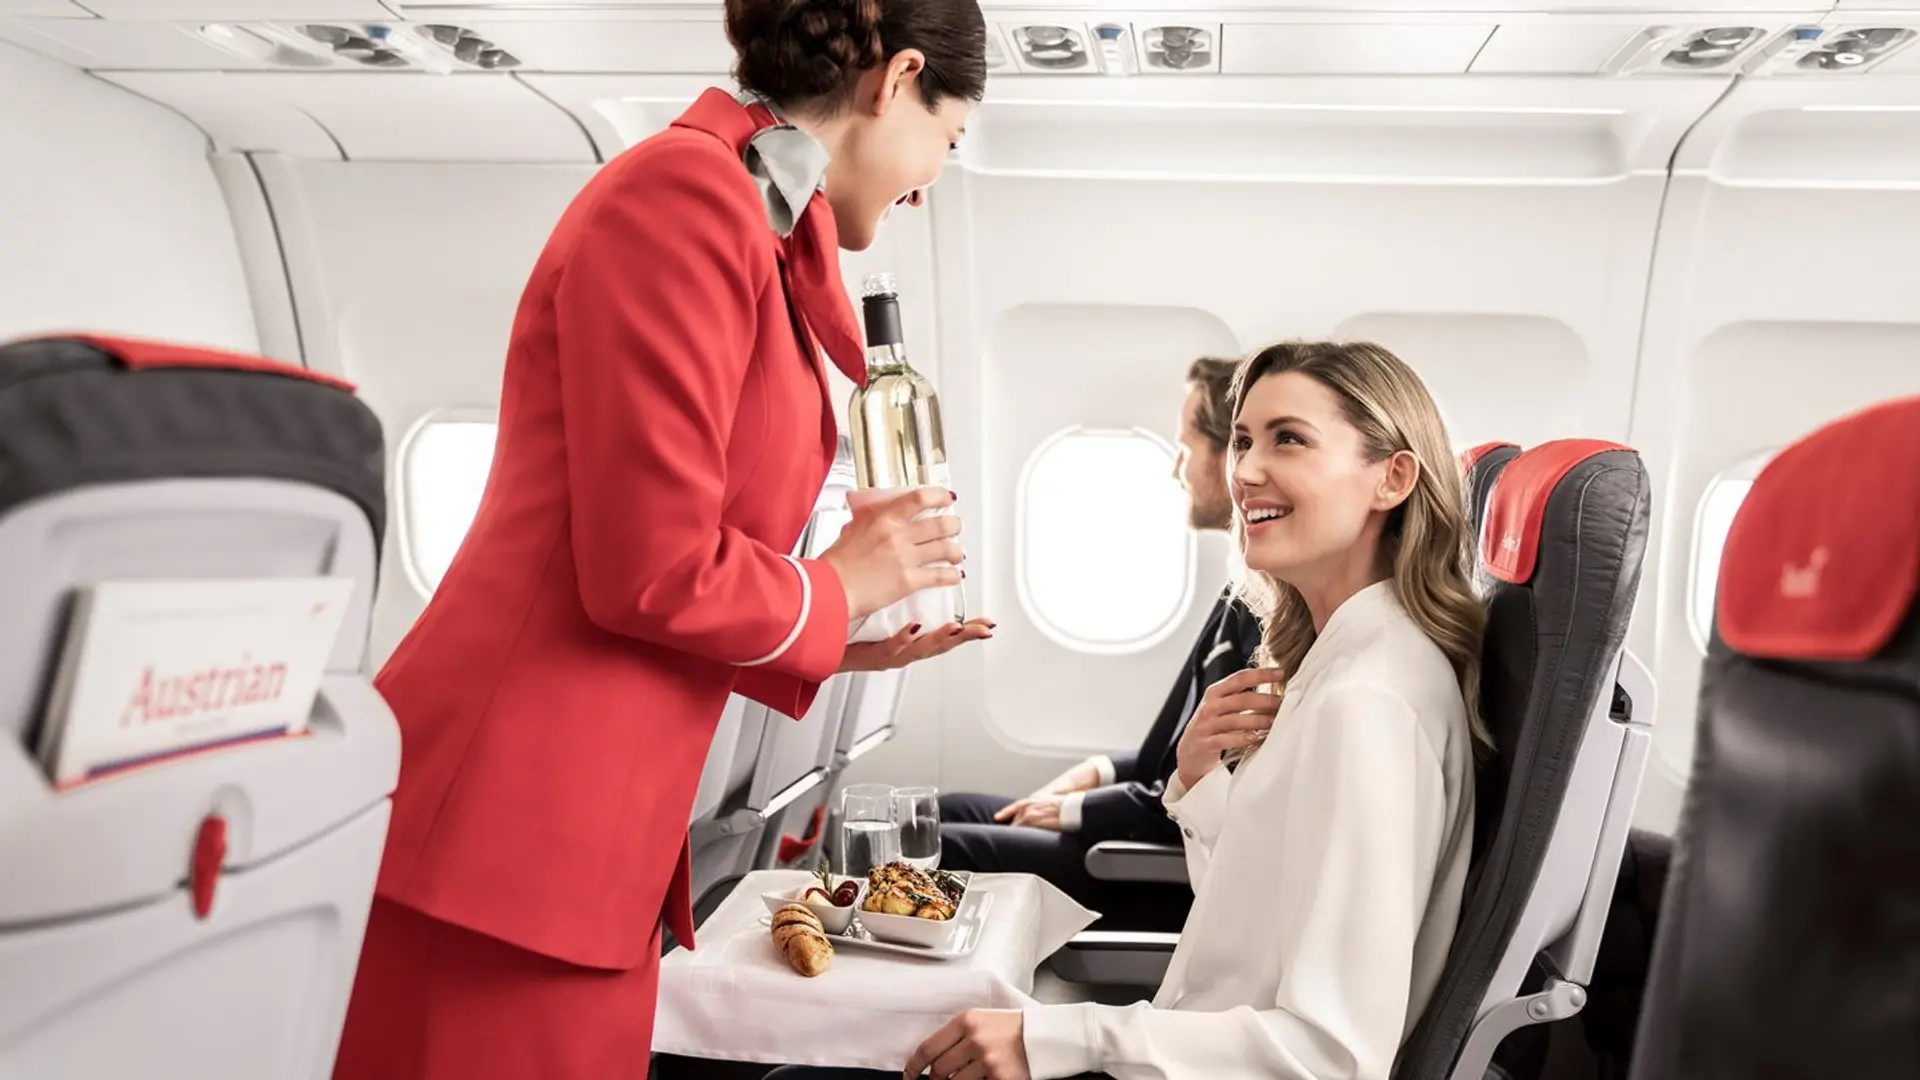 Airlines Articles - Business Class Seat Sale - Up to 50% off on Valentine’s Offer with Lufthansa